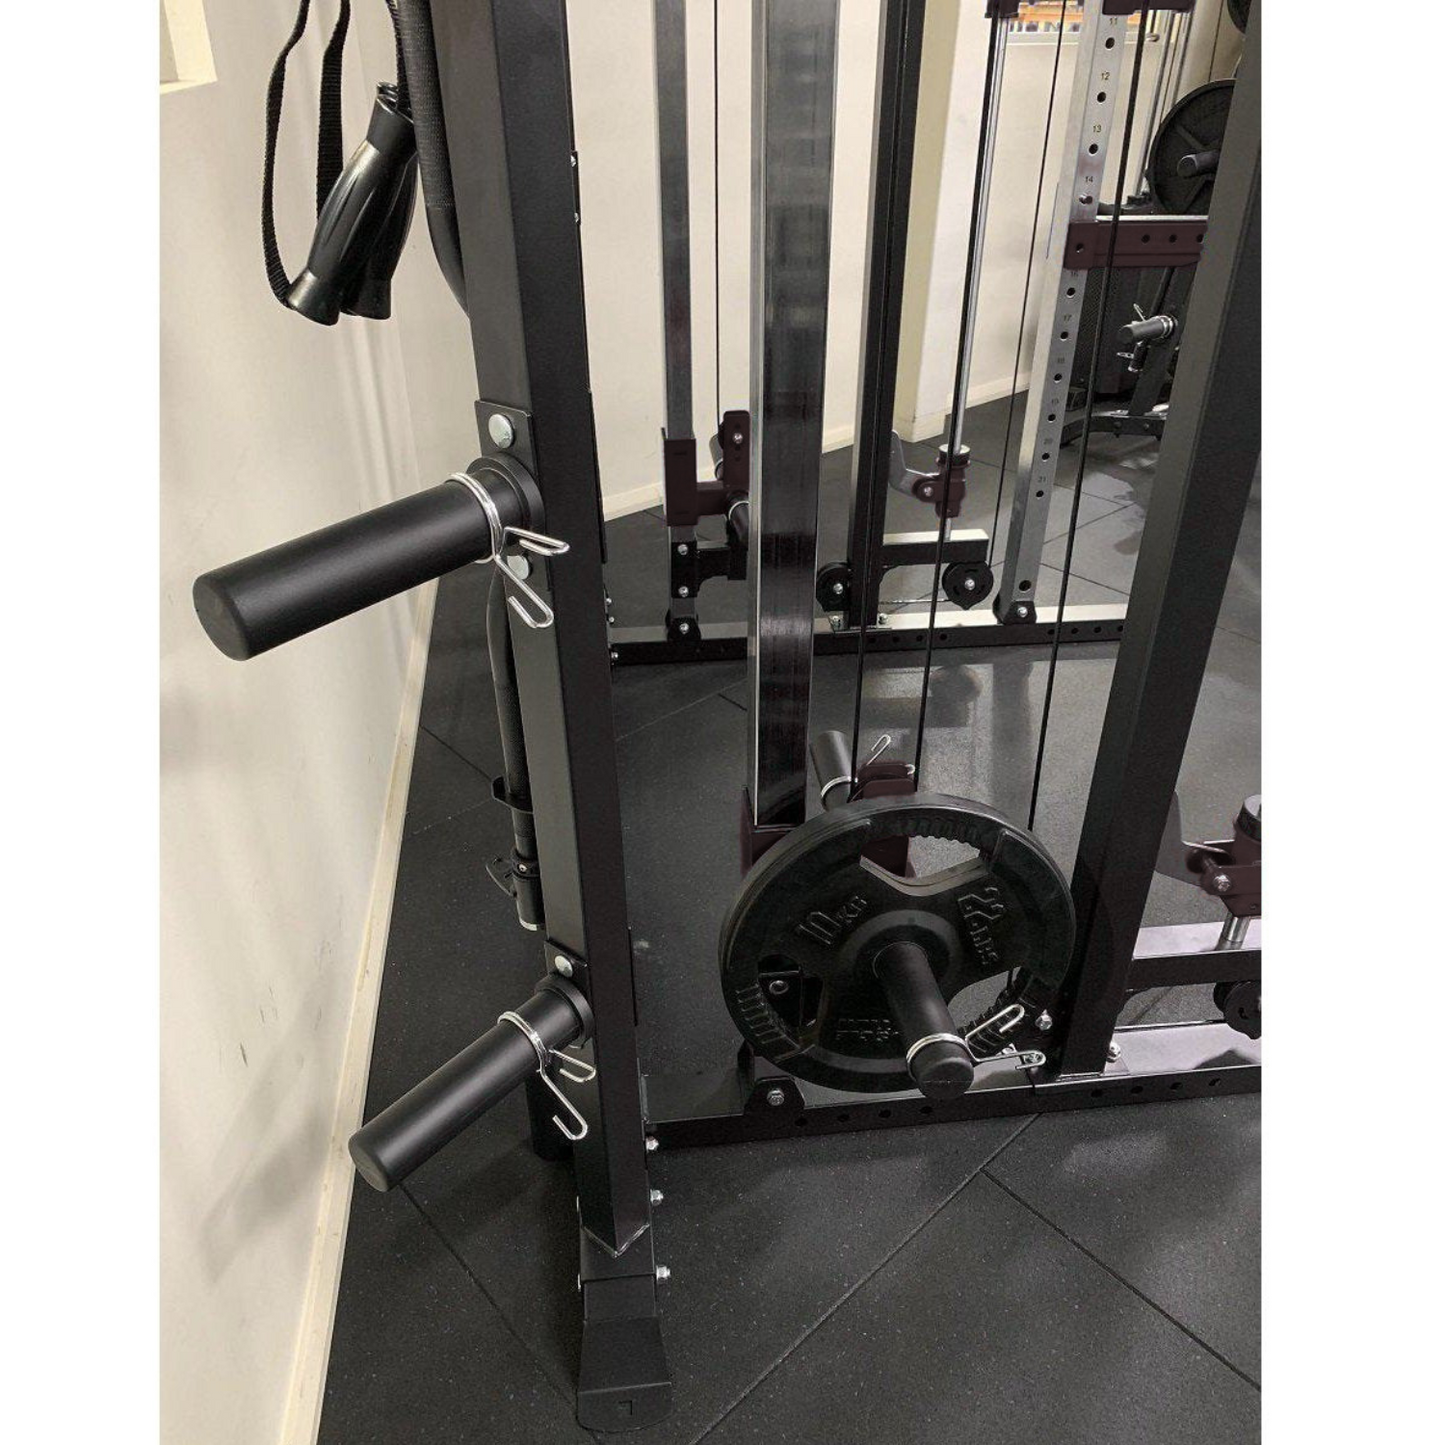 Muscle Motion FT1004 Multi Functional Trainer Smith Machine Squat Rack